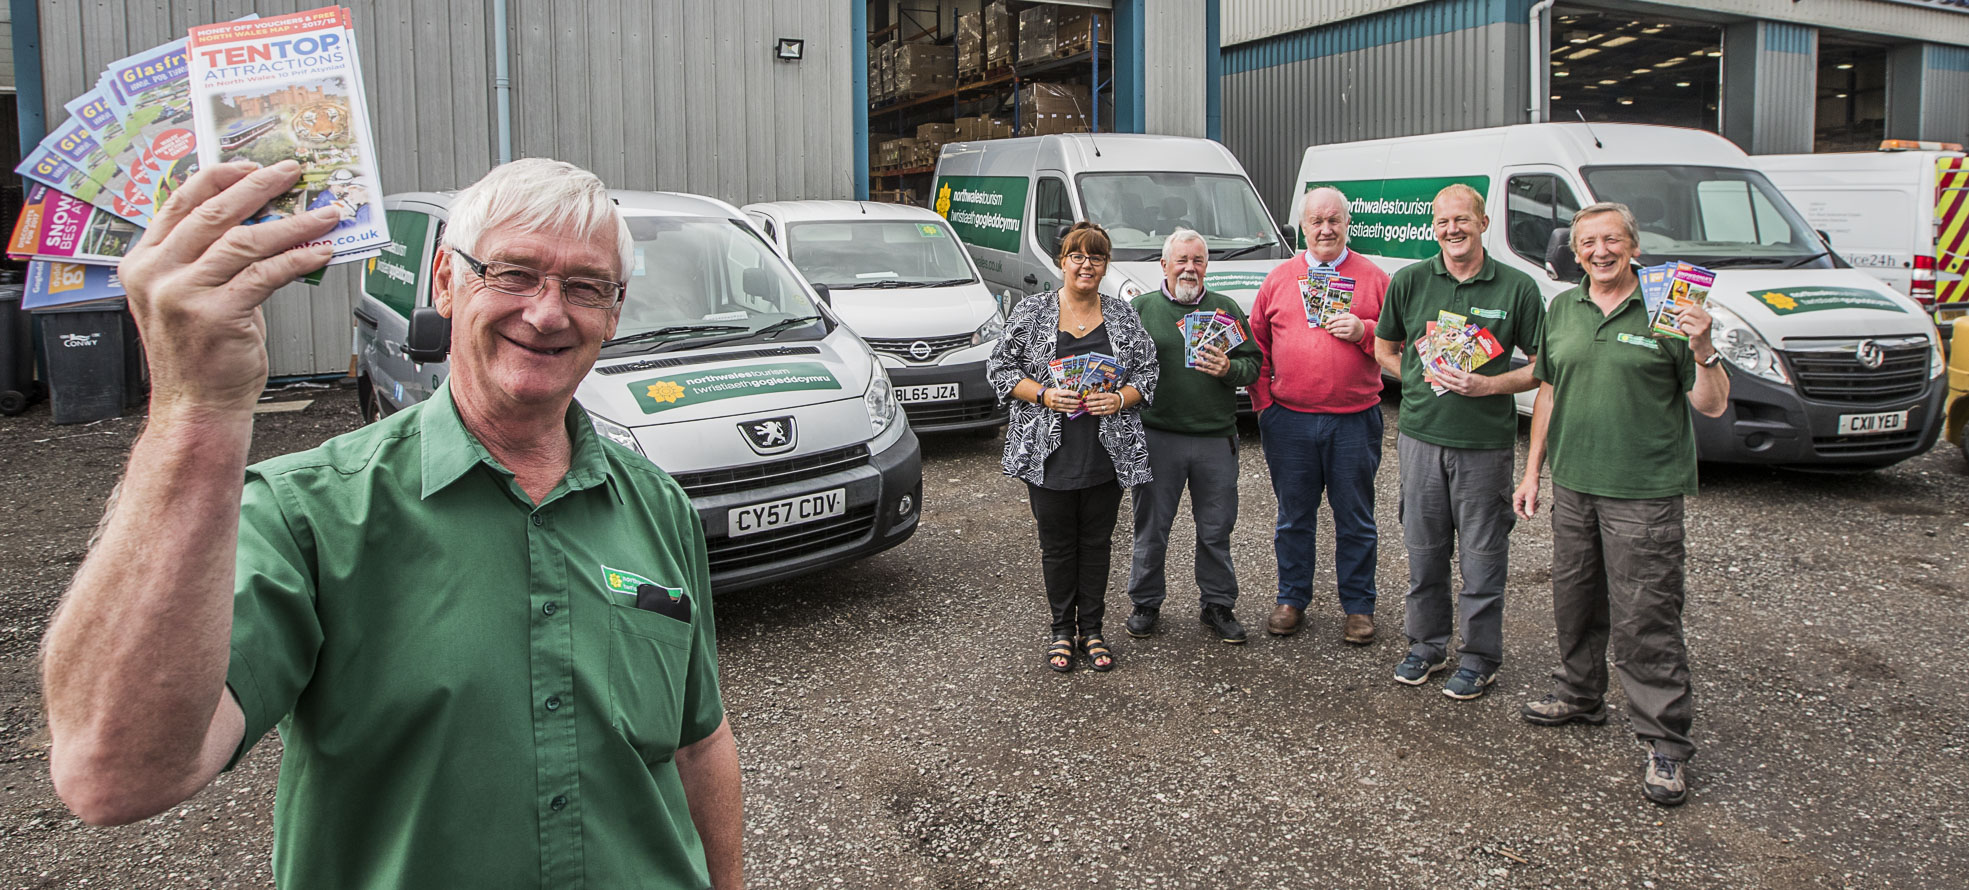 Print is alive and kicking as leaflet delivery firm expands